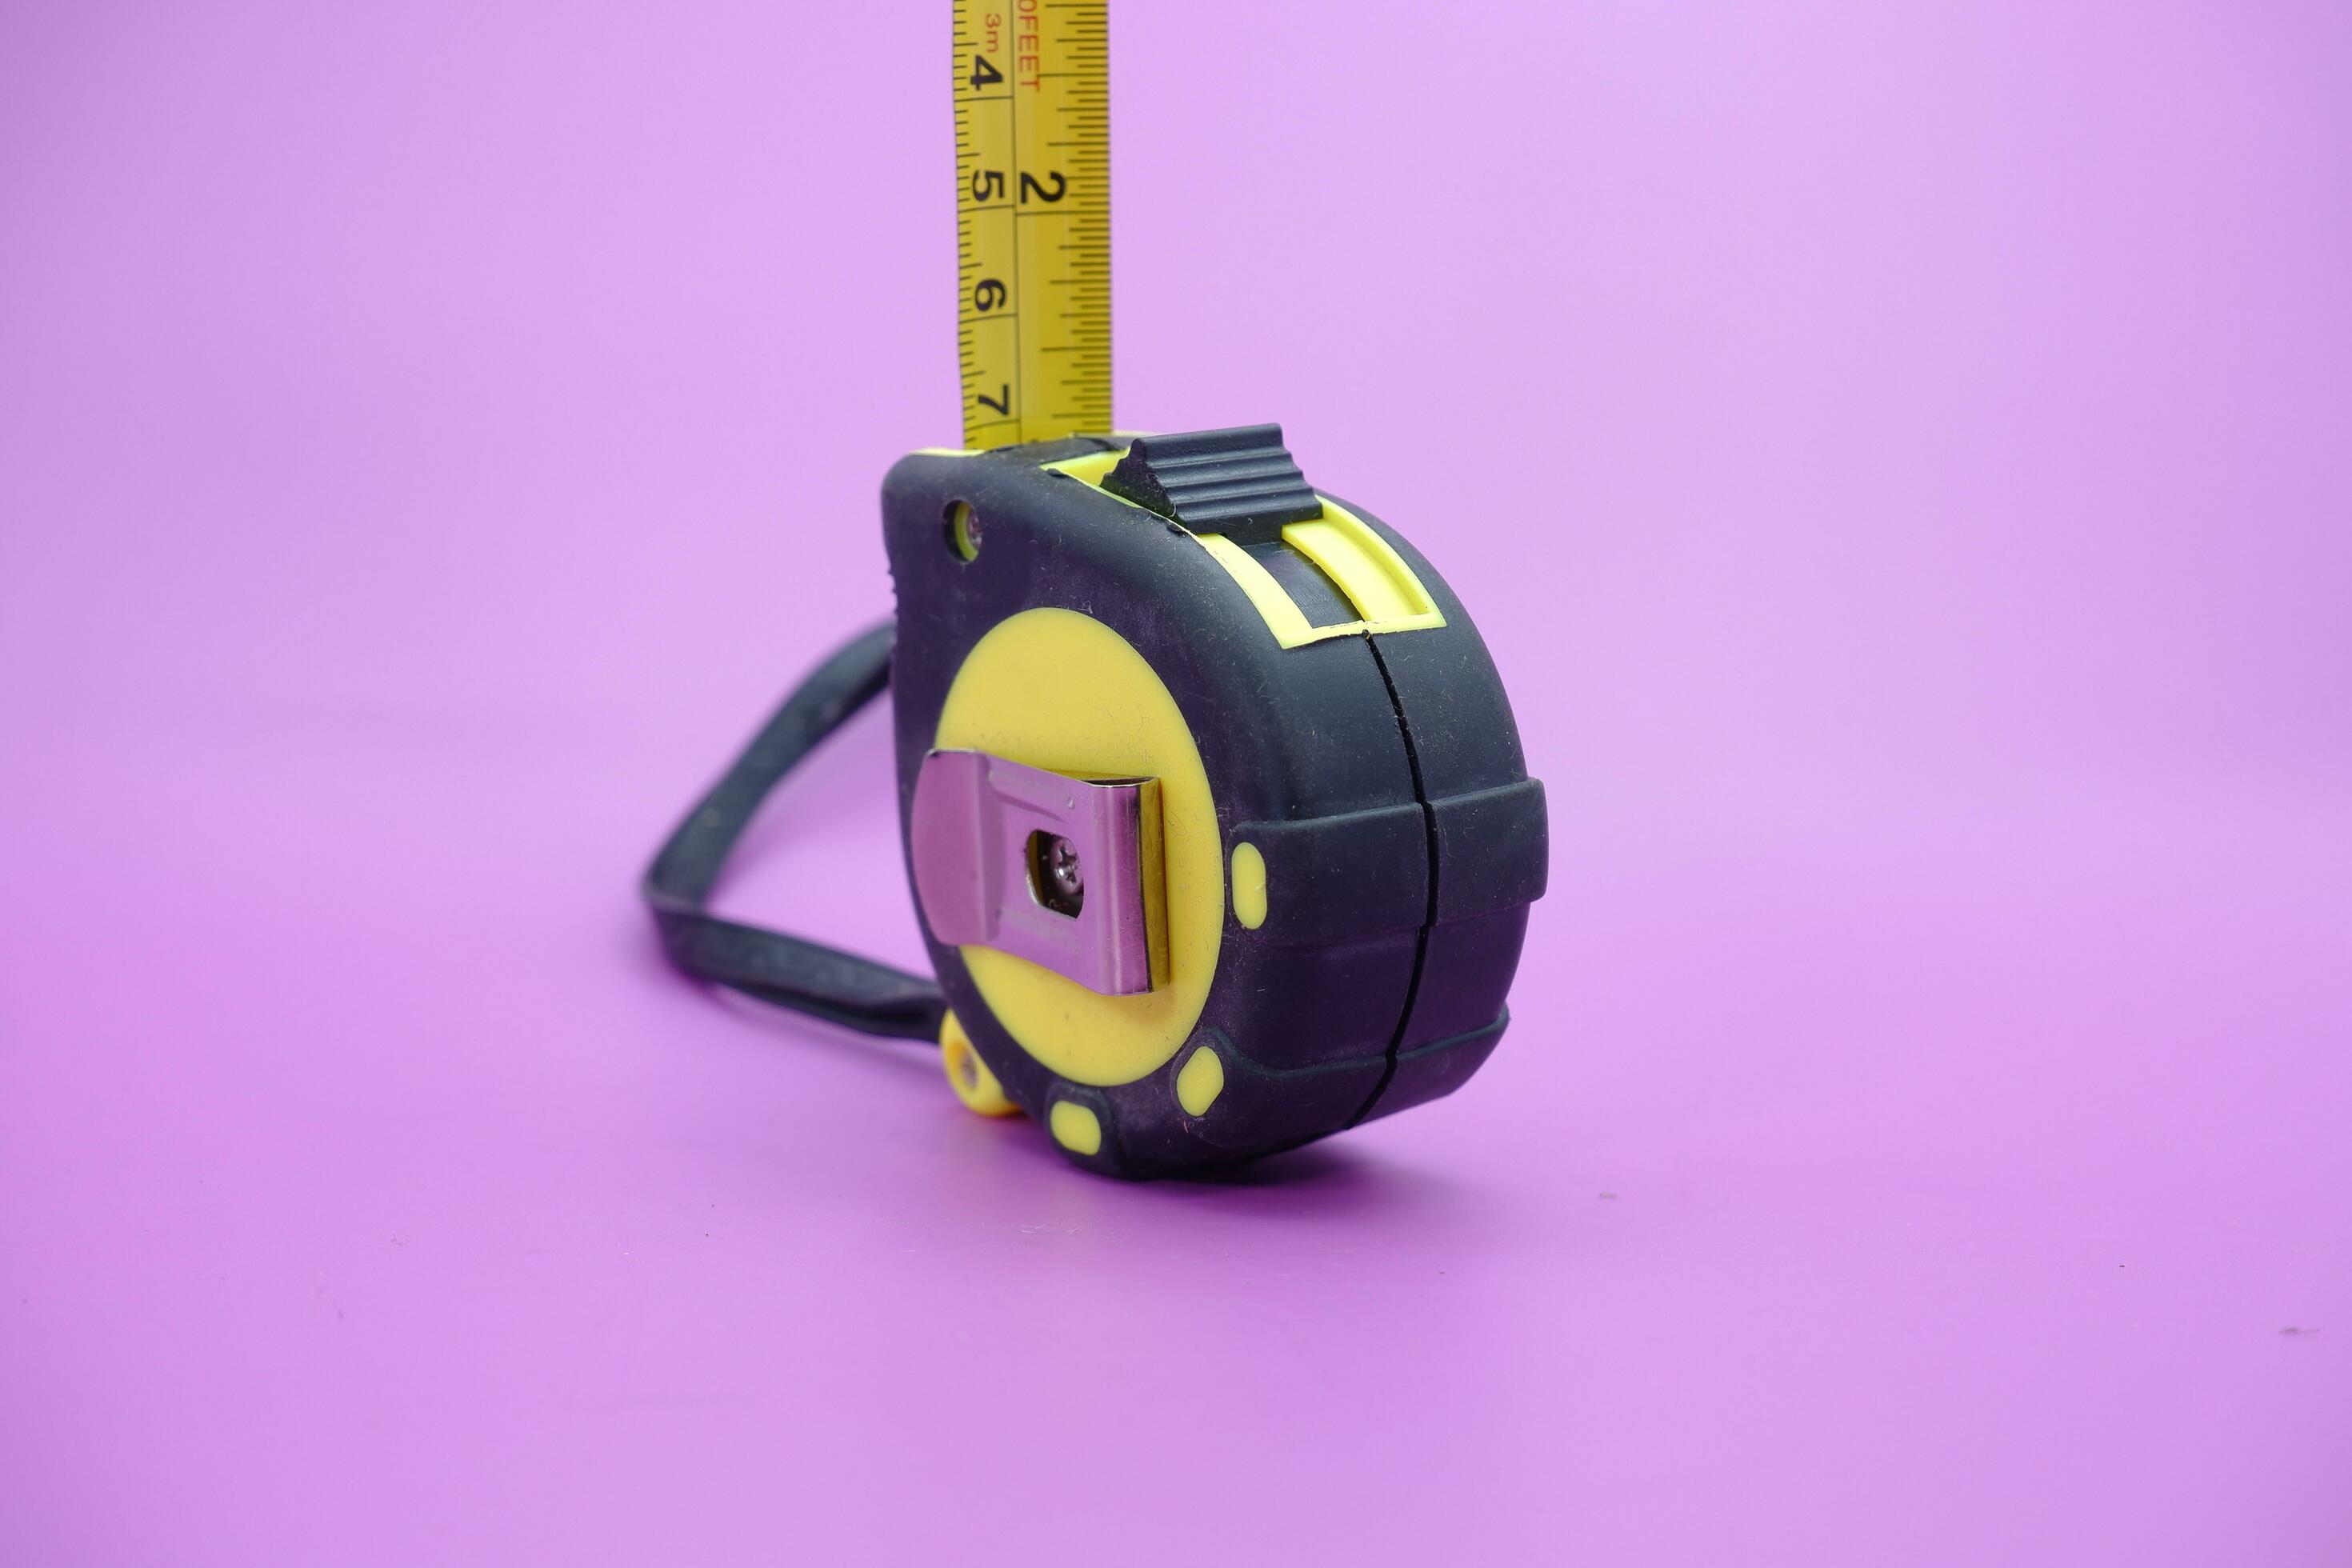 https://static.vecteezy.com/system/resources/previews/025/287/550/large_2x/tape-measure-isolated-purple-background-measuring-tool-used-by-builders-free-photo.JPG